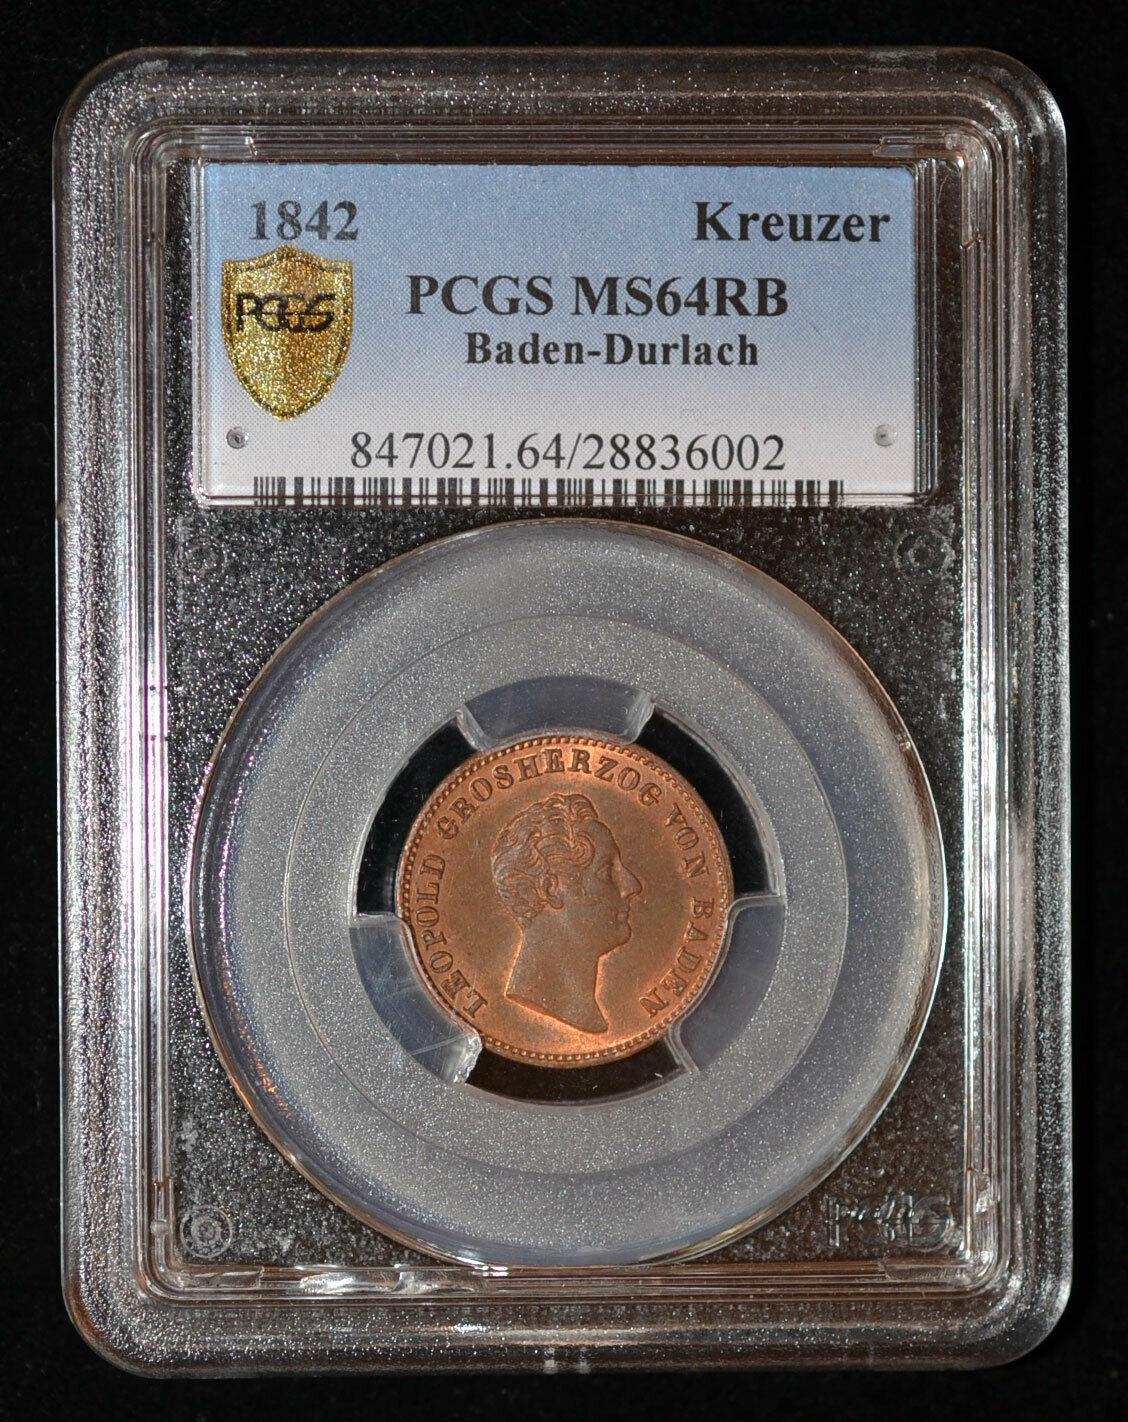 Pcgs Ms64rb 1842 Germany Baden - Durlach Kreuzer - Only One Graded By Pcgs